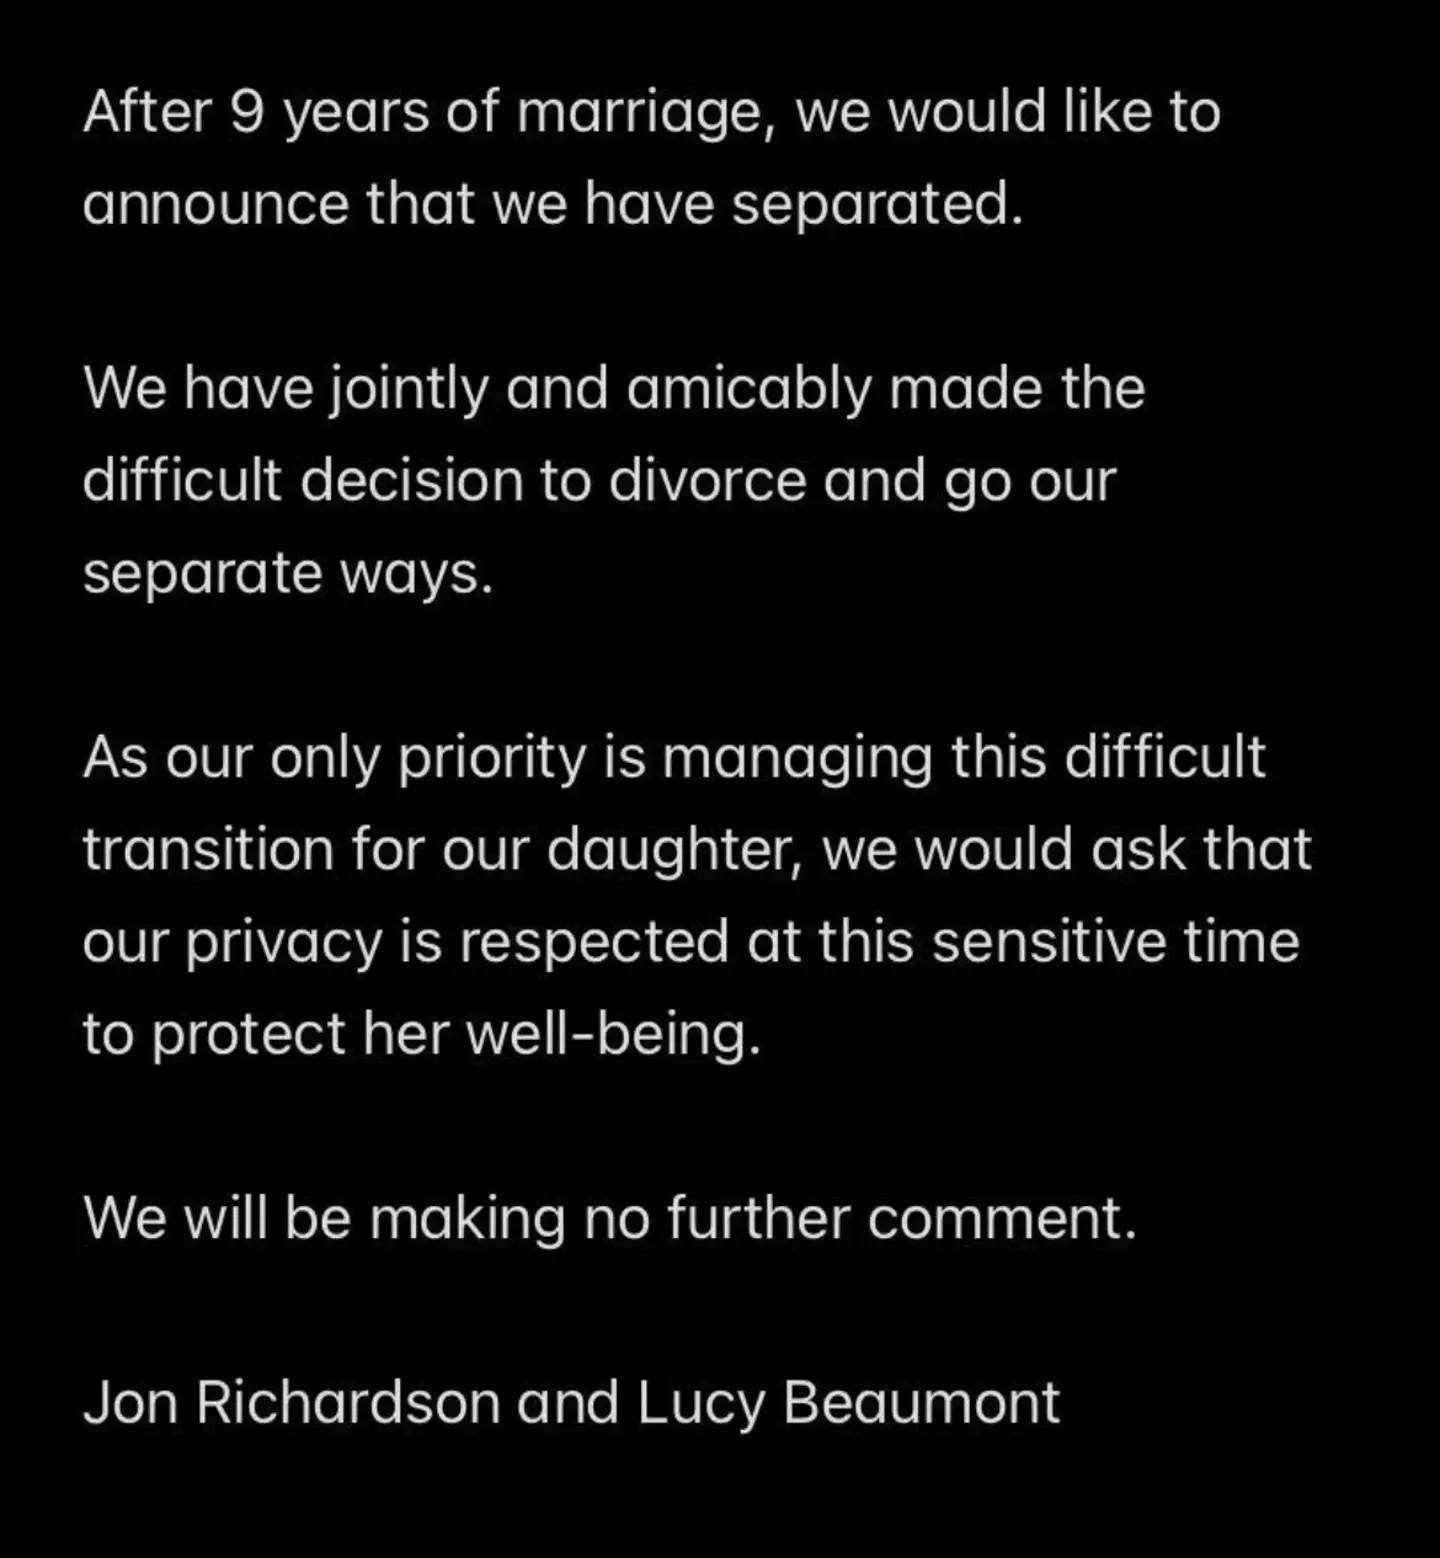 They issued a joint statement on the split. (Instagram/@the_one_from_hull)